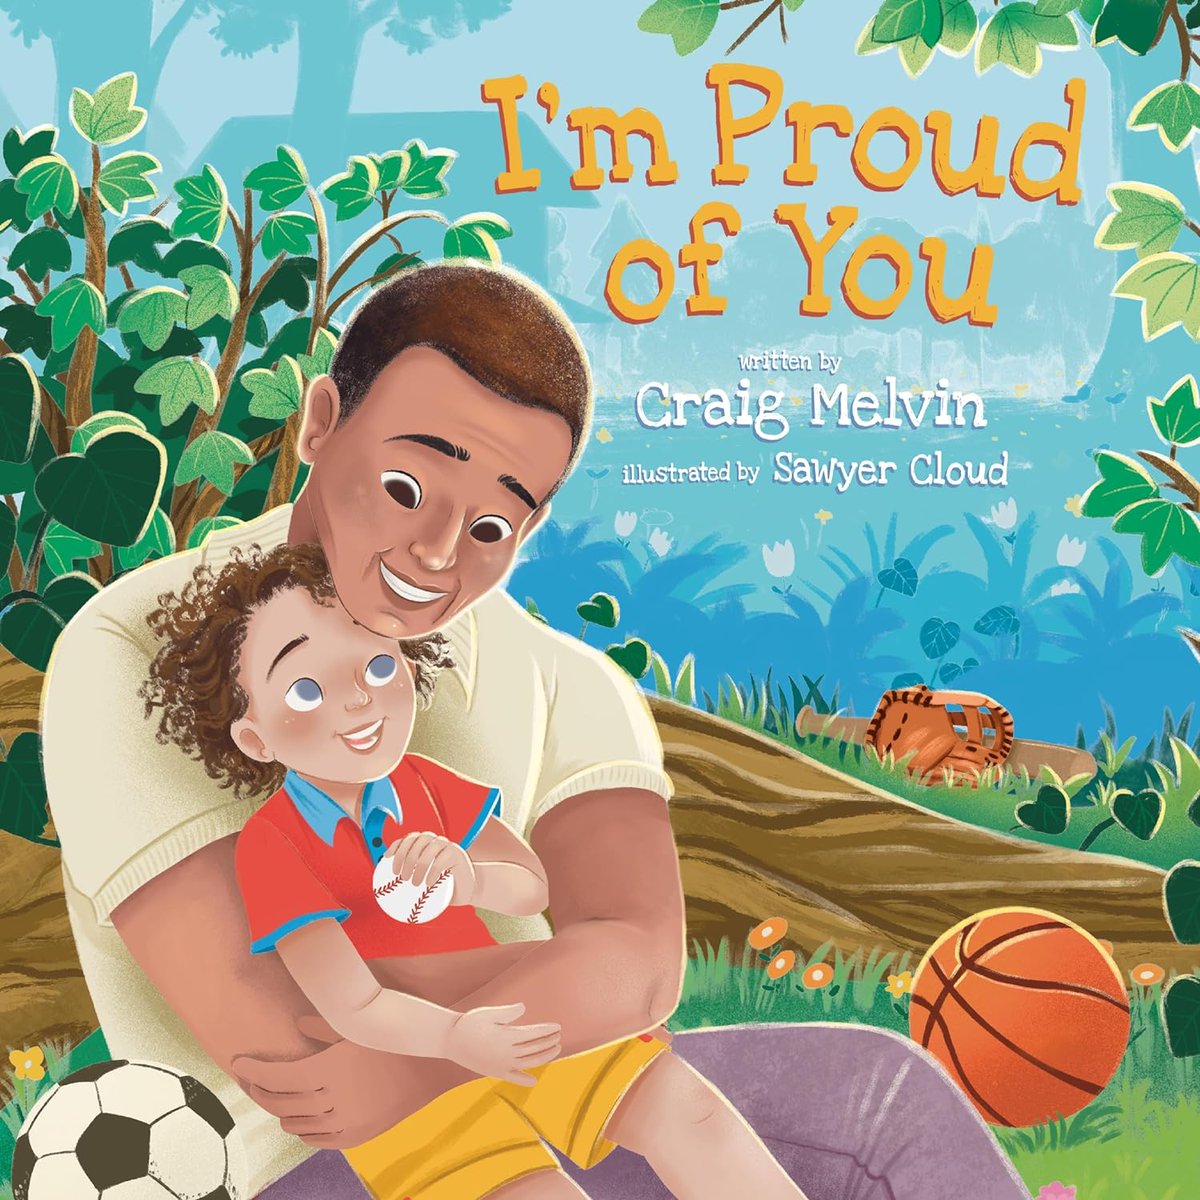 🎉🙌🏿Happy #BookBirthday🙌🏿🎉 📖I’M PROUD OF YOU by Craig Melvin @craigmelvin, Sawyer Cloud @SawyerCloud, Quill Tree Books @QuillTreeBooks Congrats!!! #OurStoriesMatter